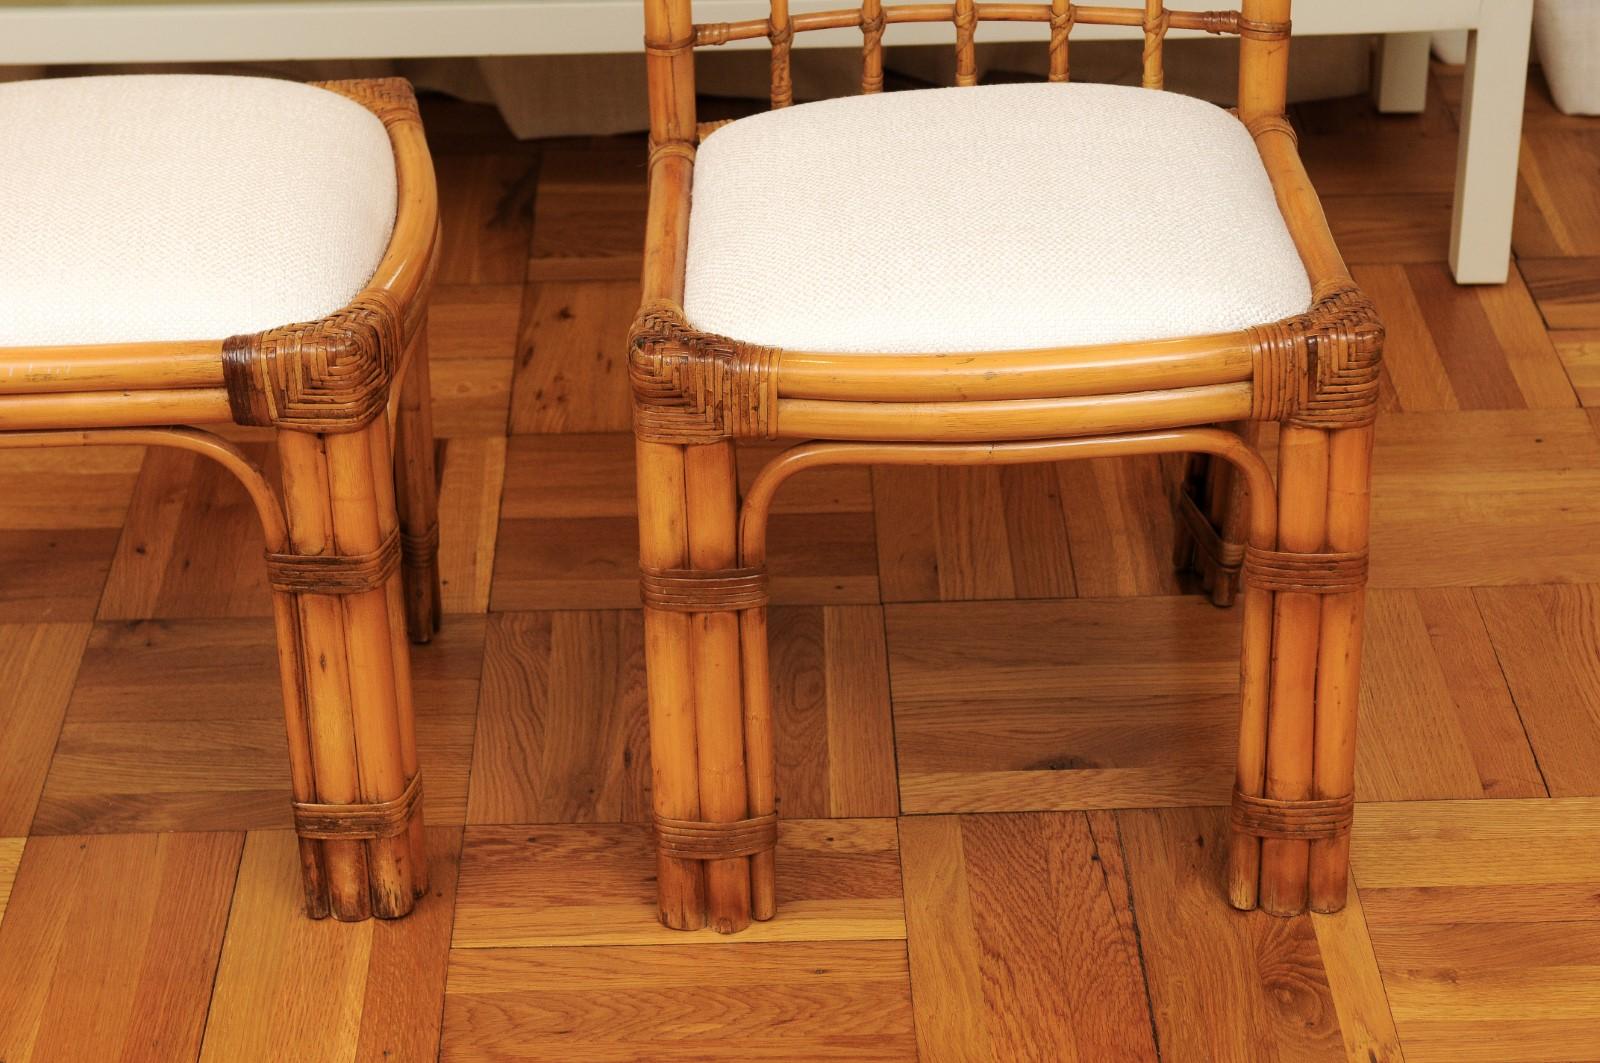 Unique Restored Set of 8 Square Series Dining Chairs by Henry Olko, circa 1979 For Sale 4